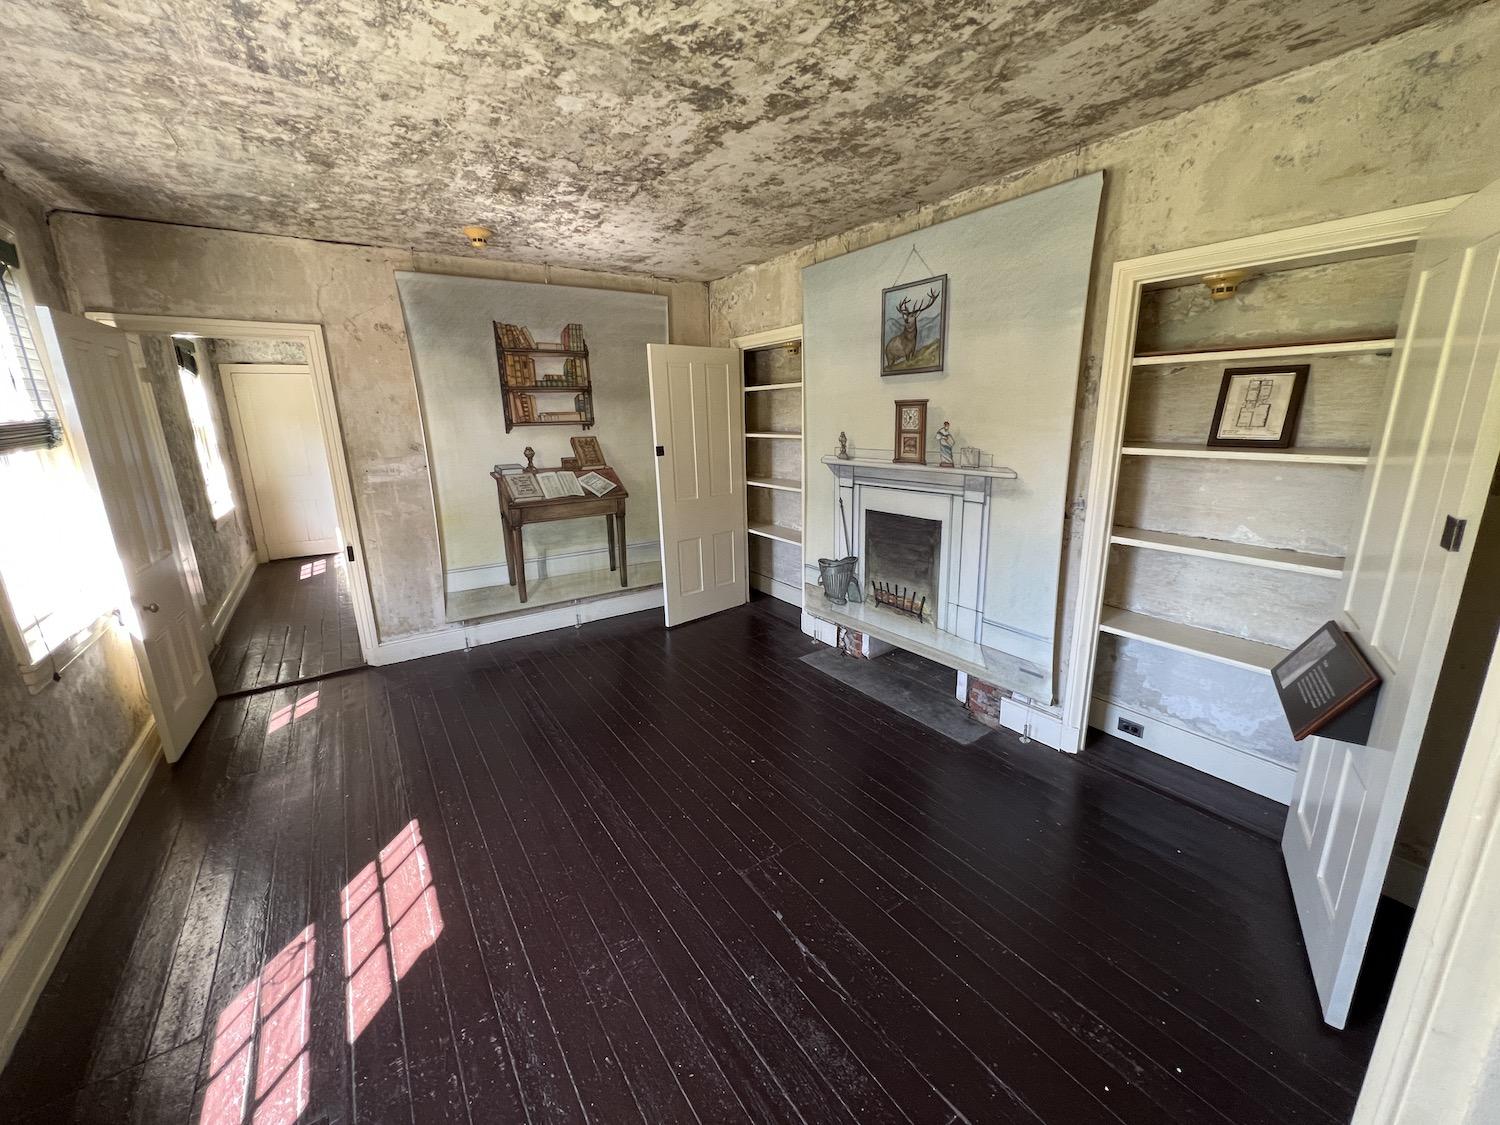 With the help of art, you can imagine the time when this was Edgar Allan Poe's parlor.